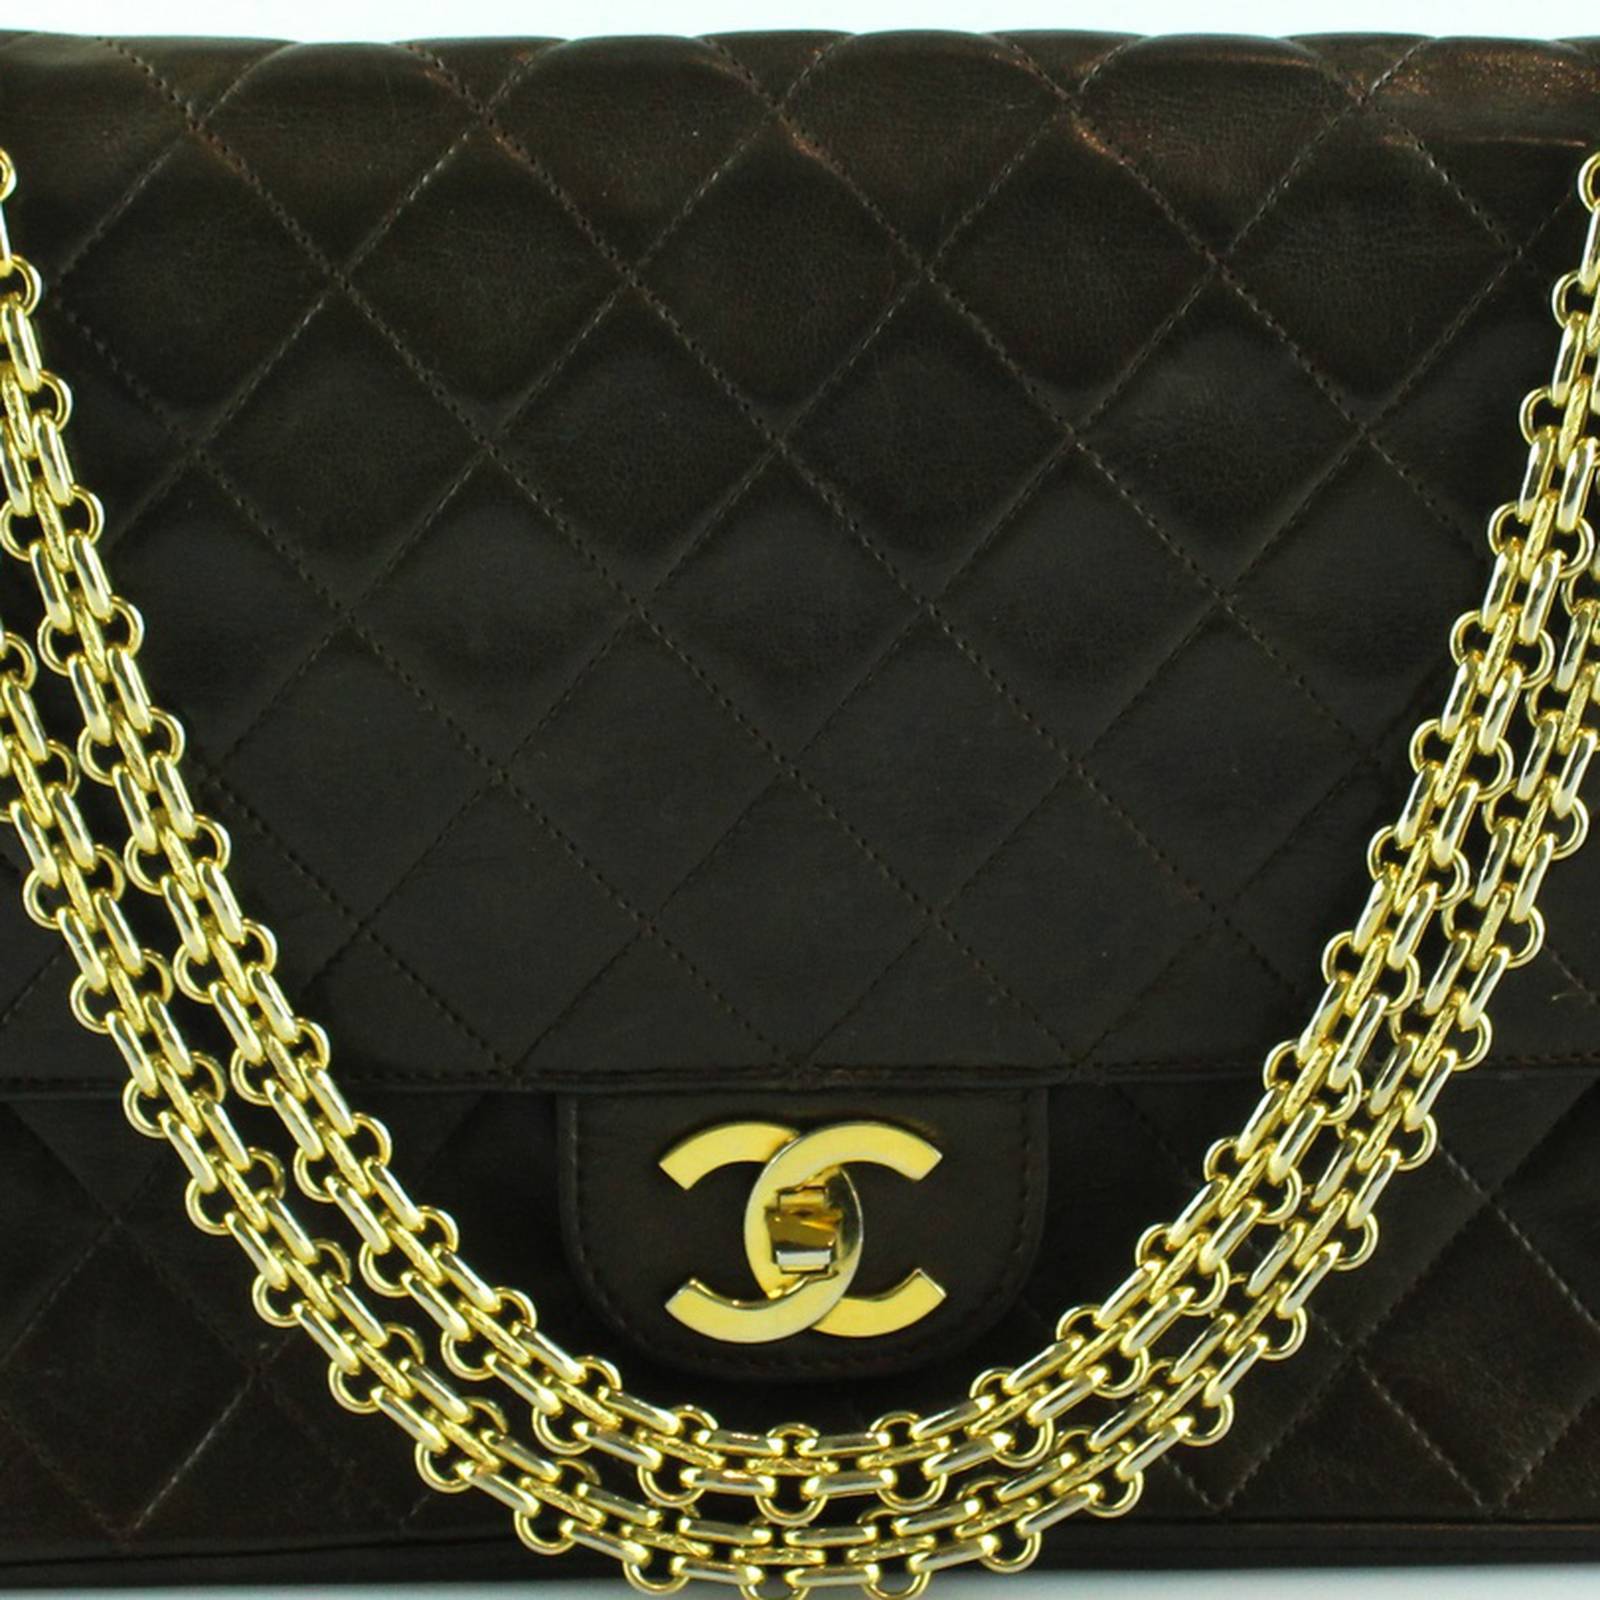 Celebrity Chanel Bag. The 15 Most Iconic Chanel Bags of All Time